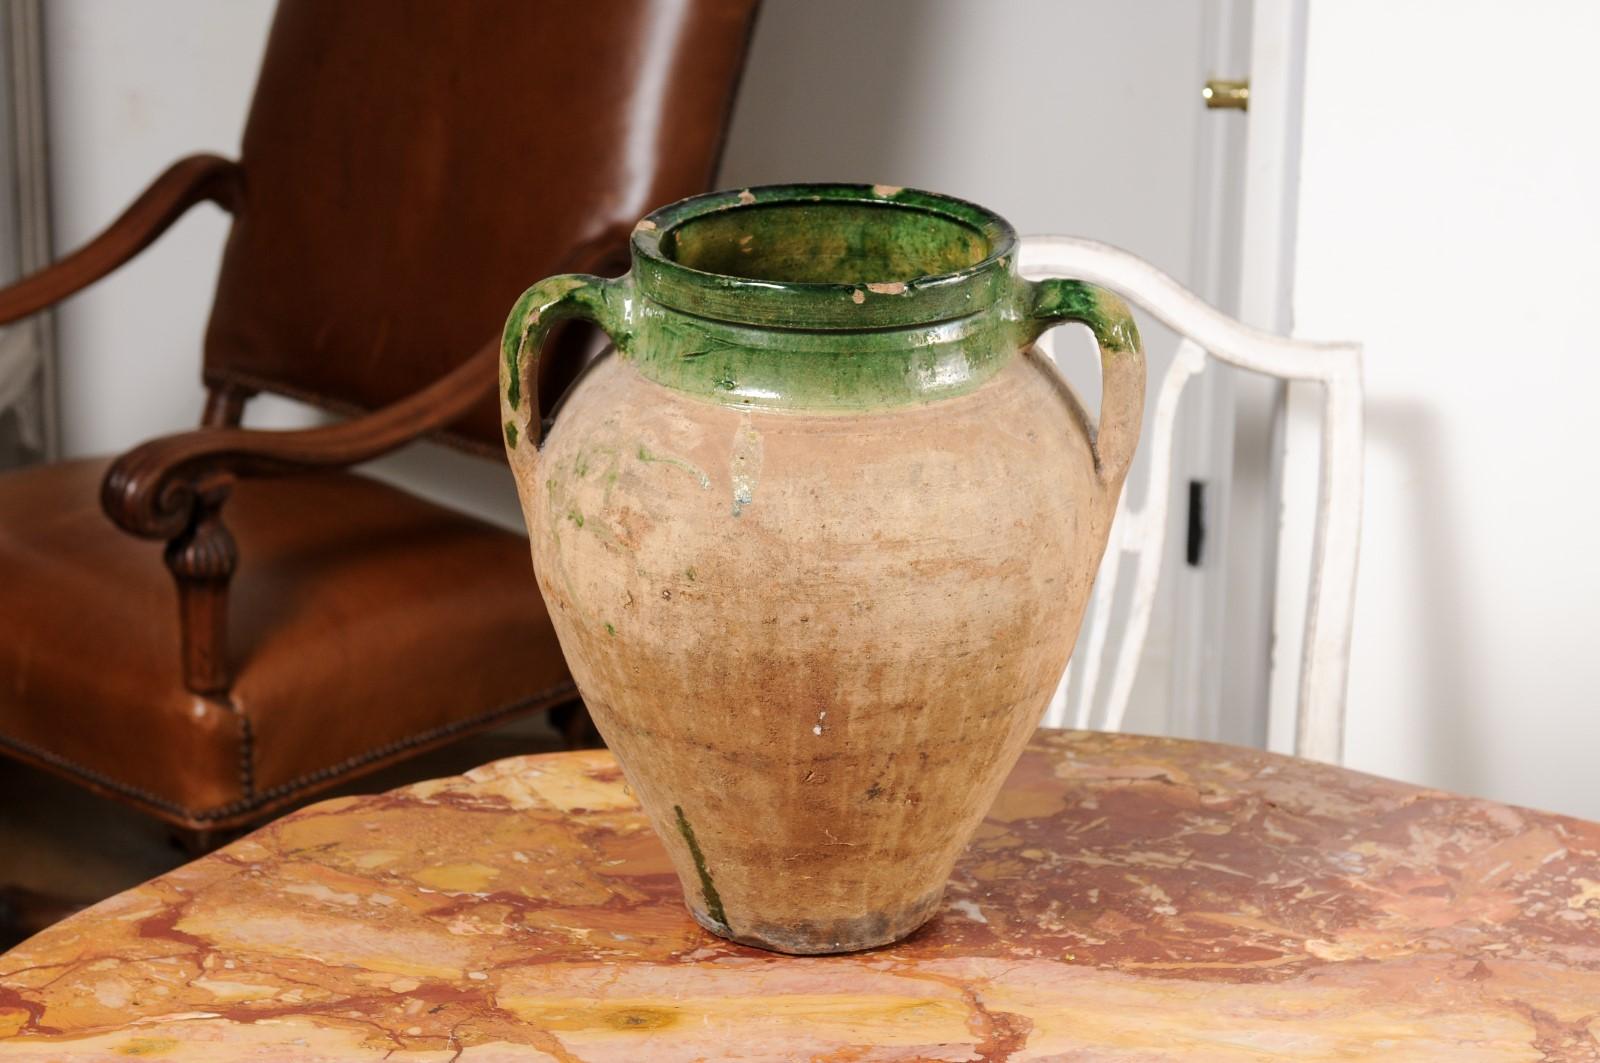 English Rustic 1930s Terracotta Olive Oil Jar Circa 1930 with Green Glazed Top For Sale 6